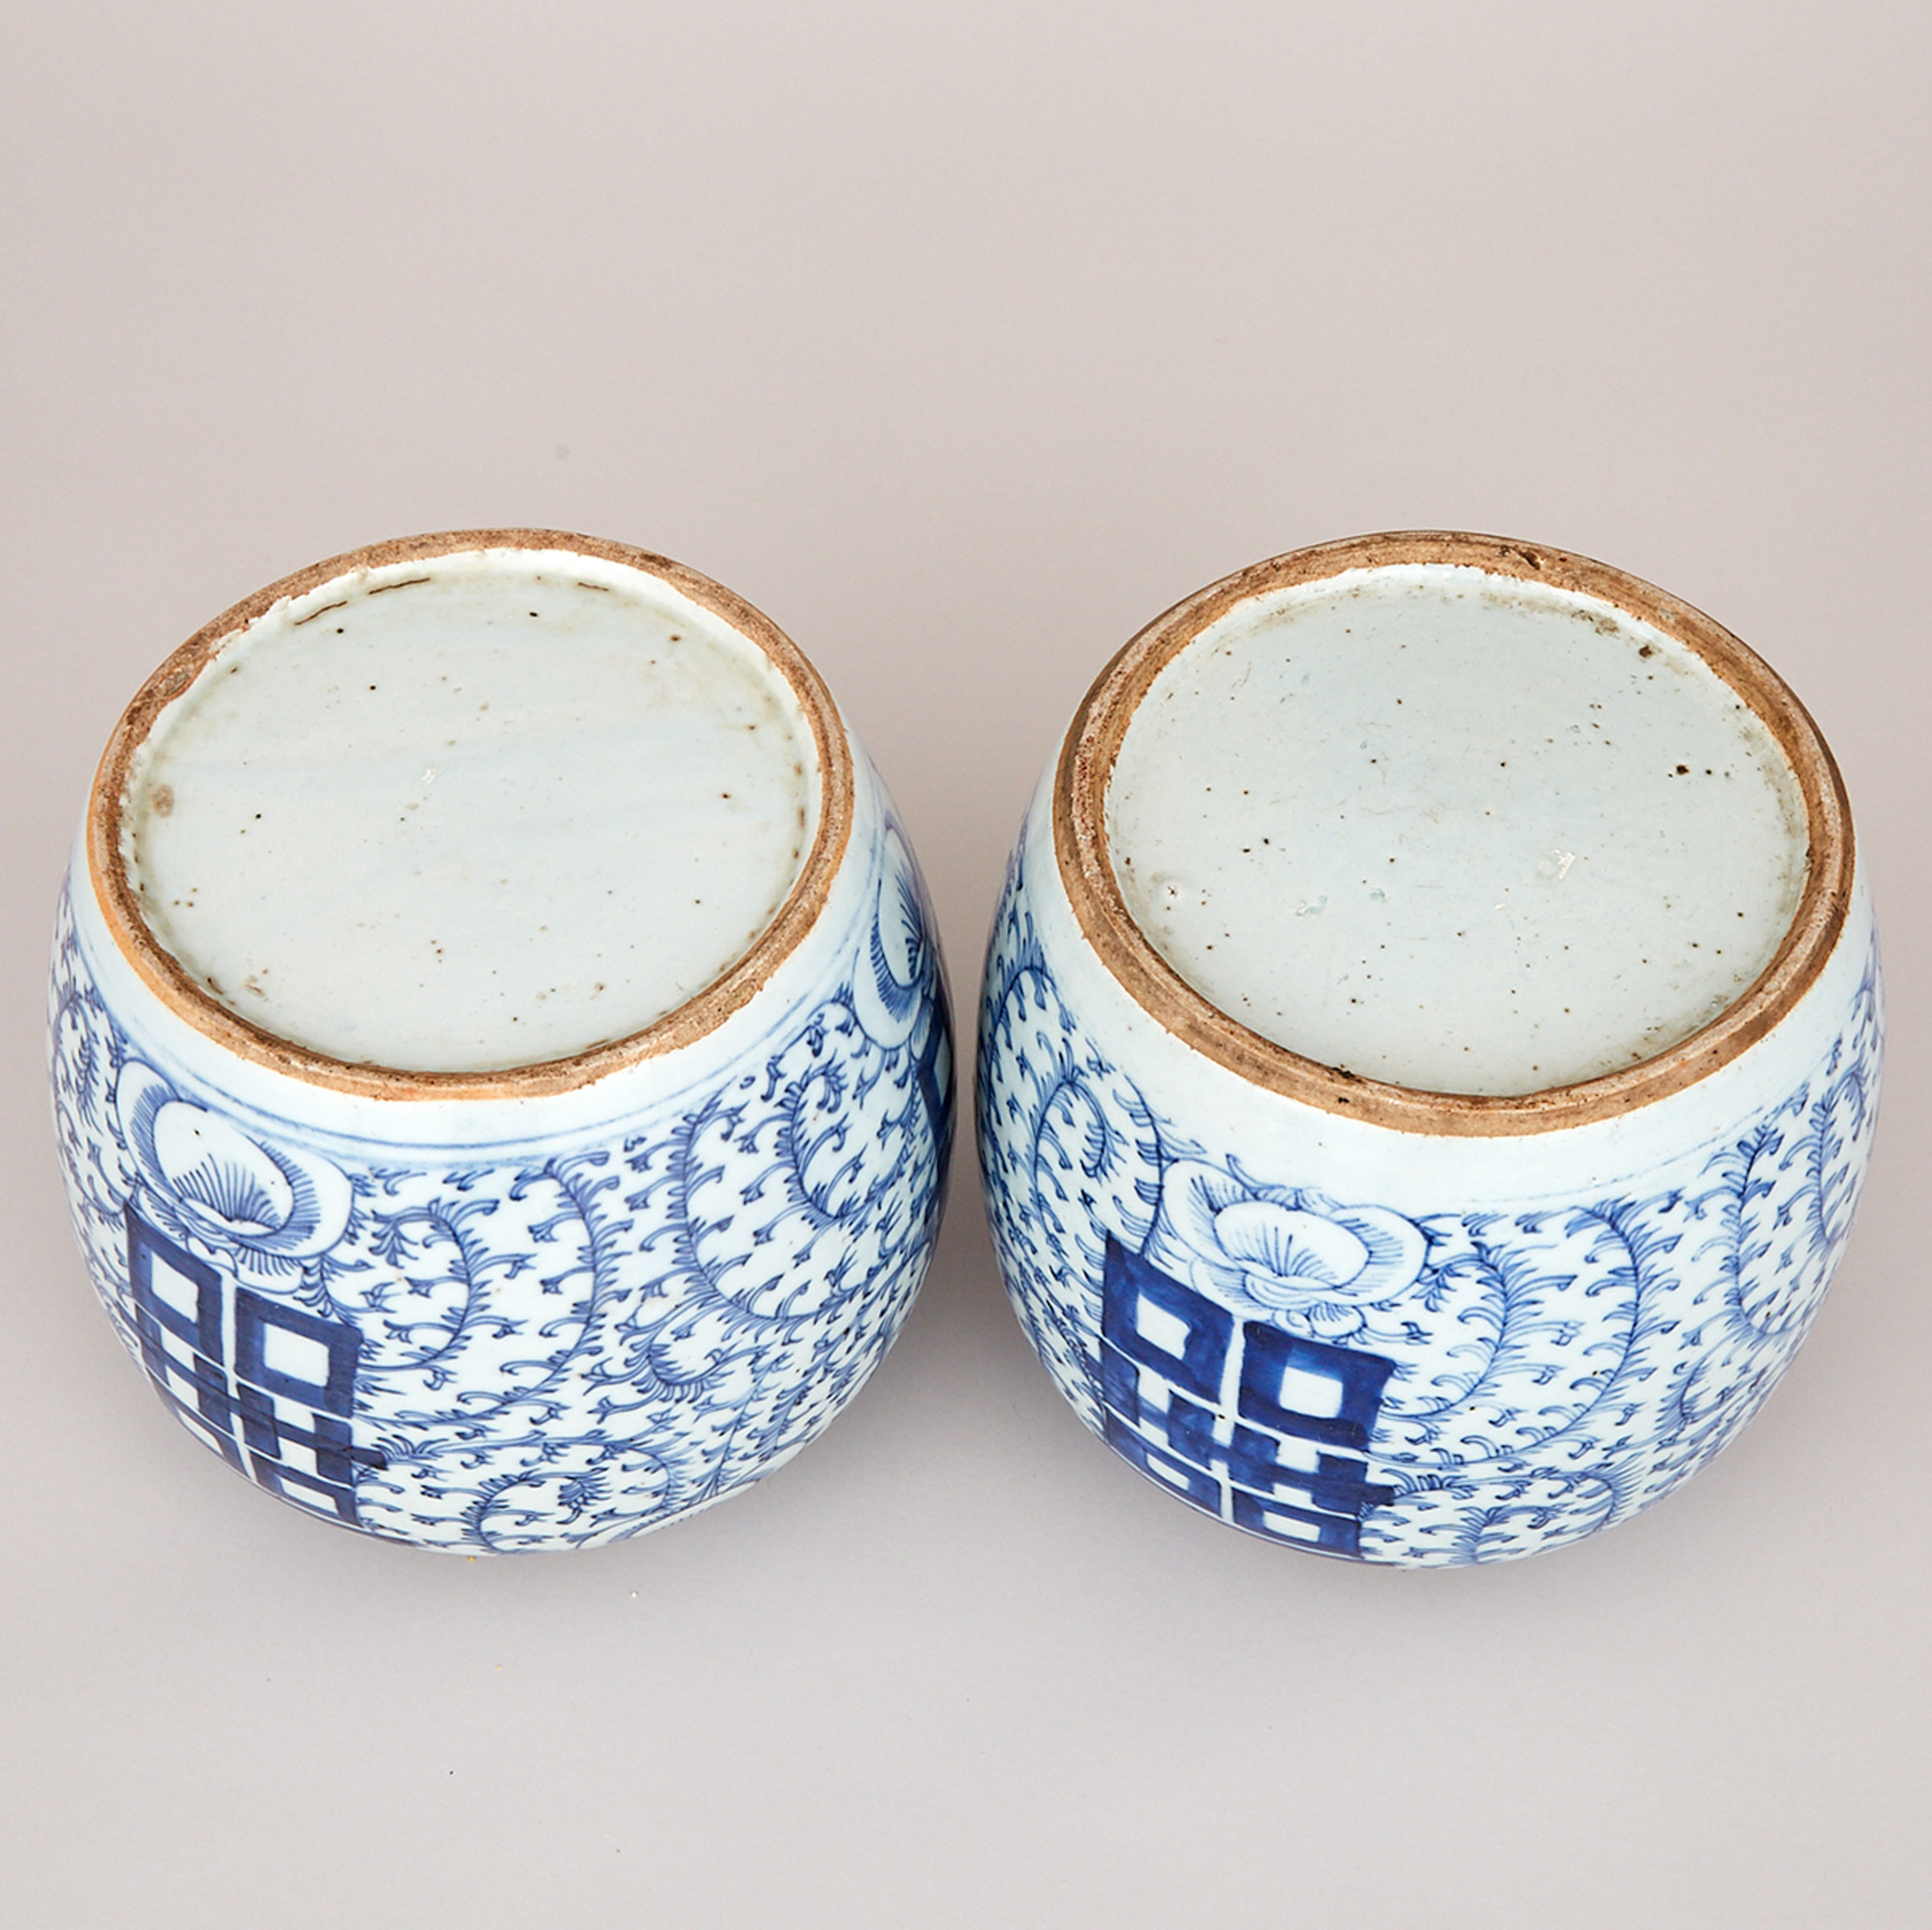 A Pair of Blue and White Ginger Jars, 19th Century